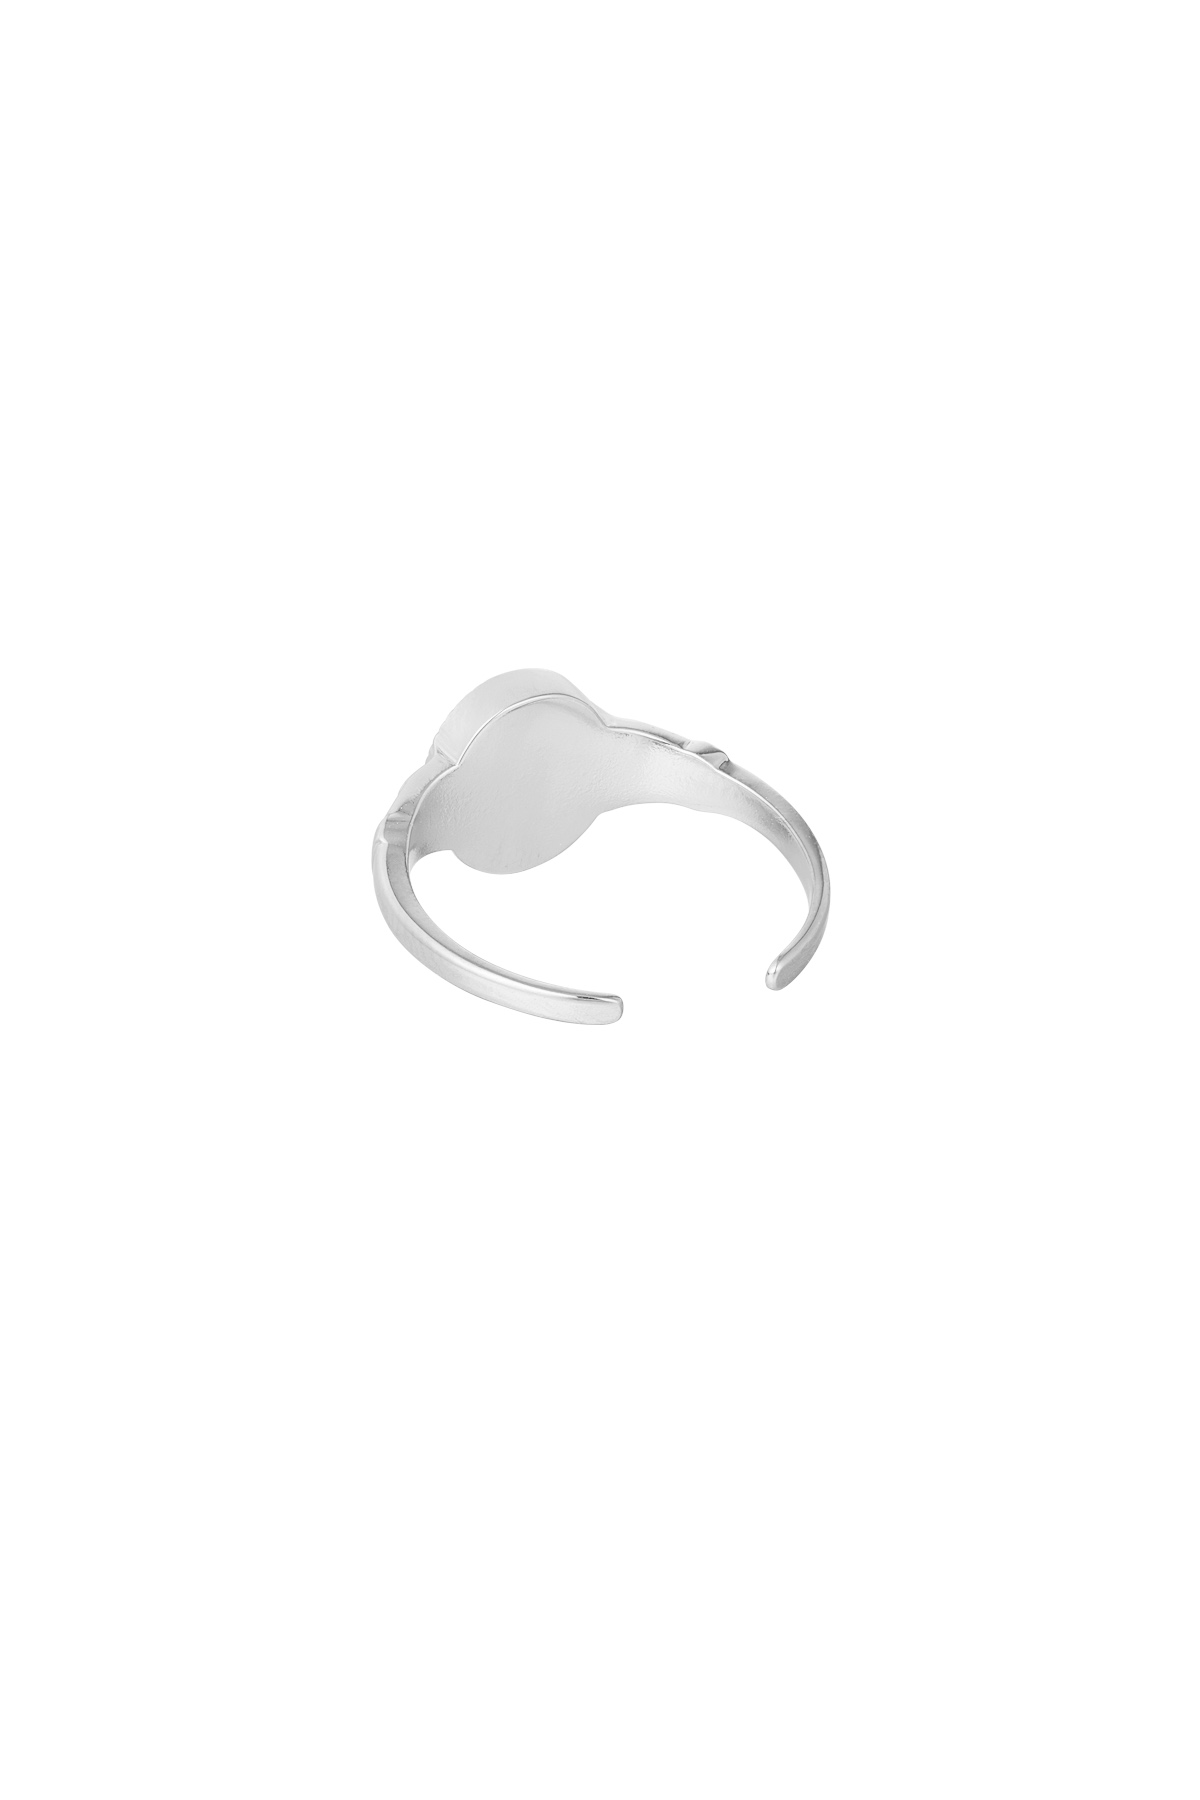 Ring flower one size - silver Picture5